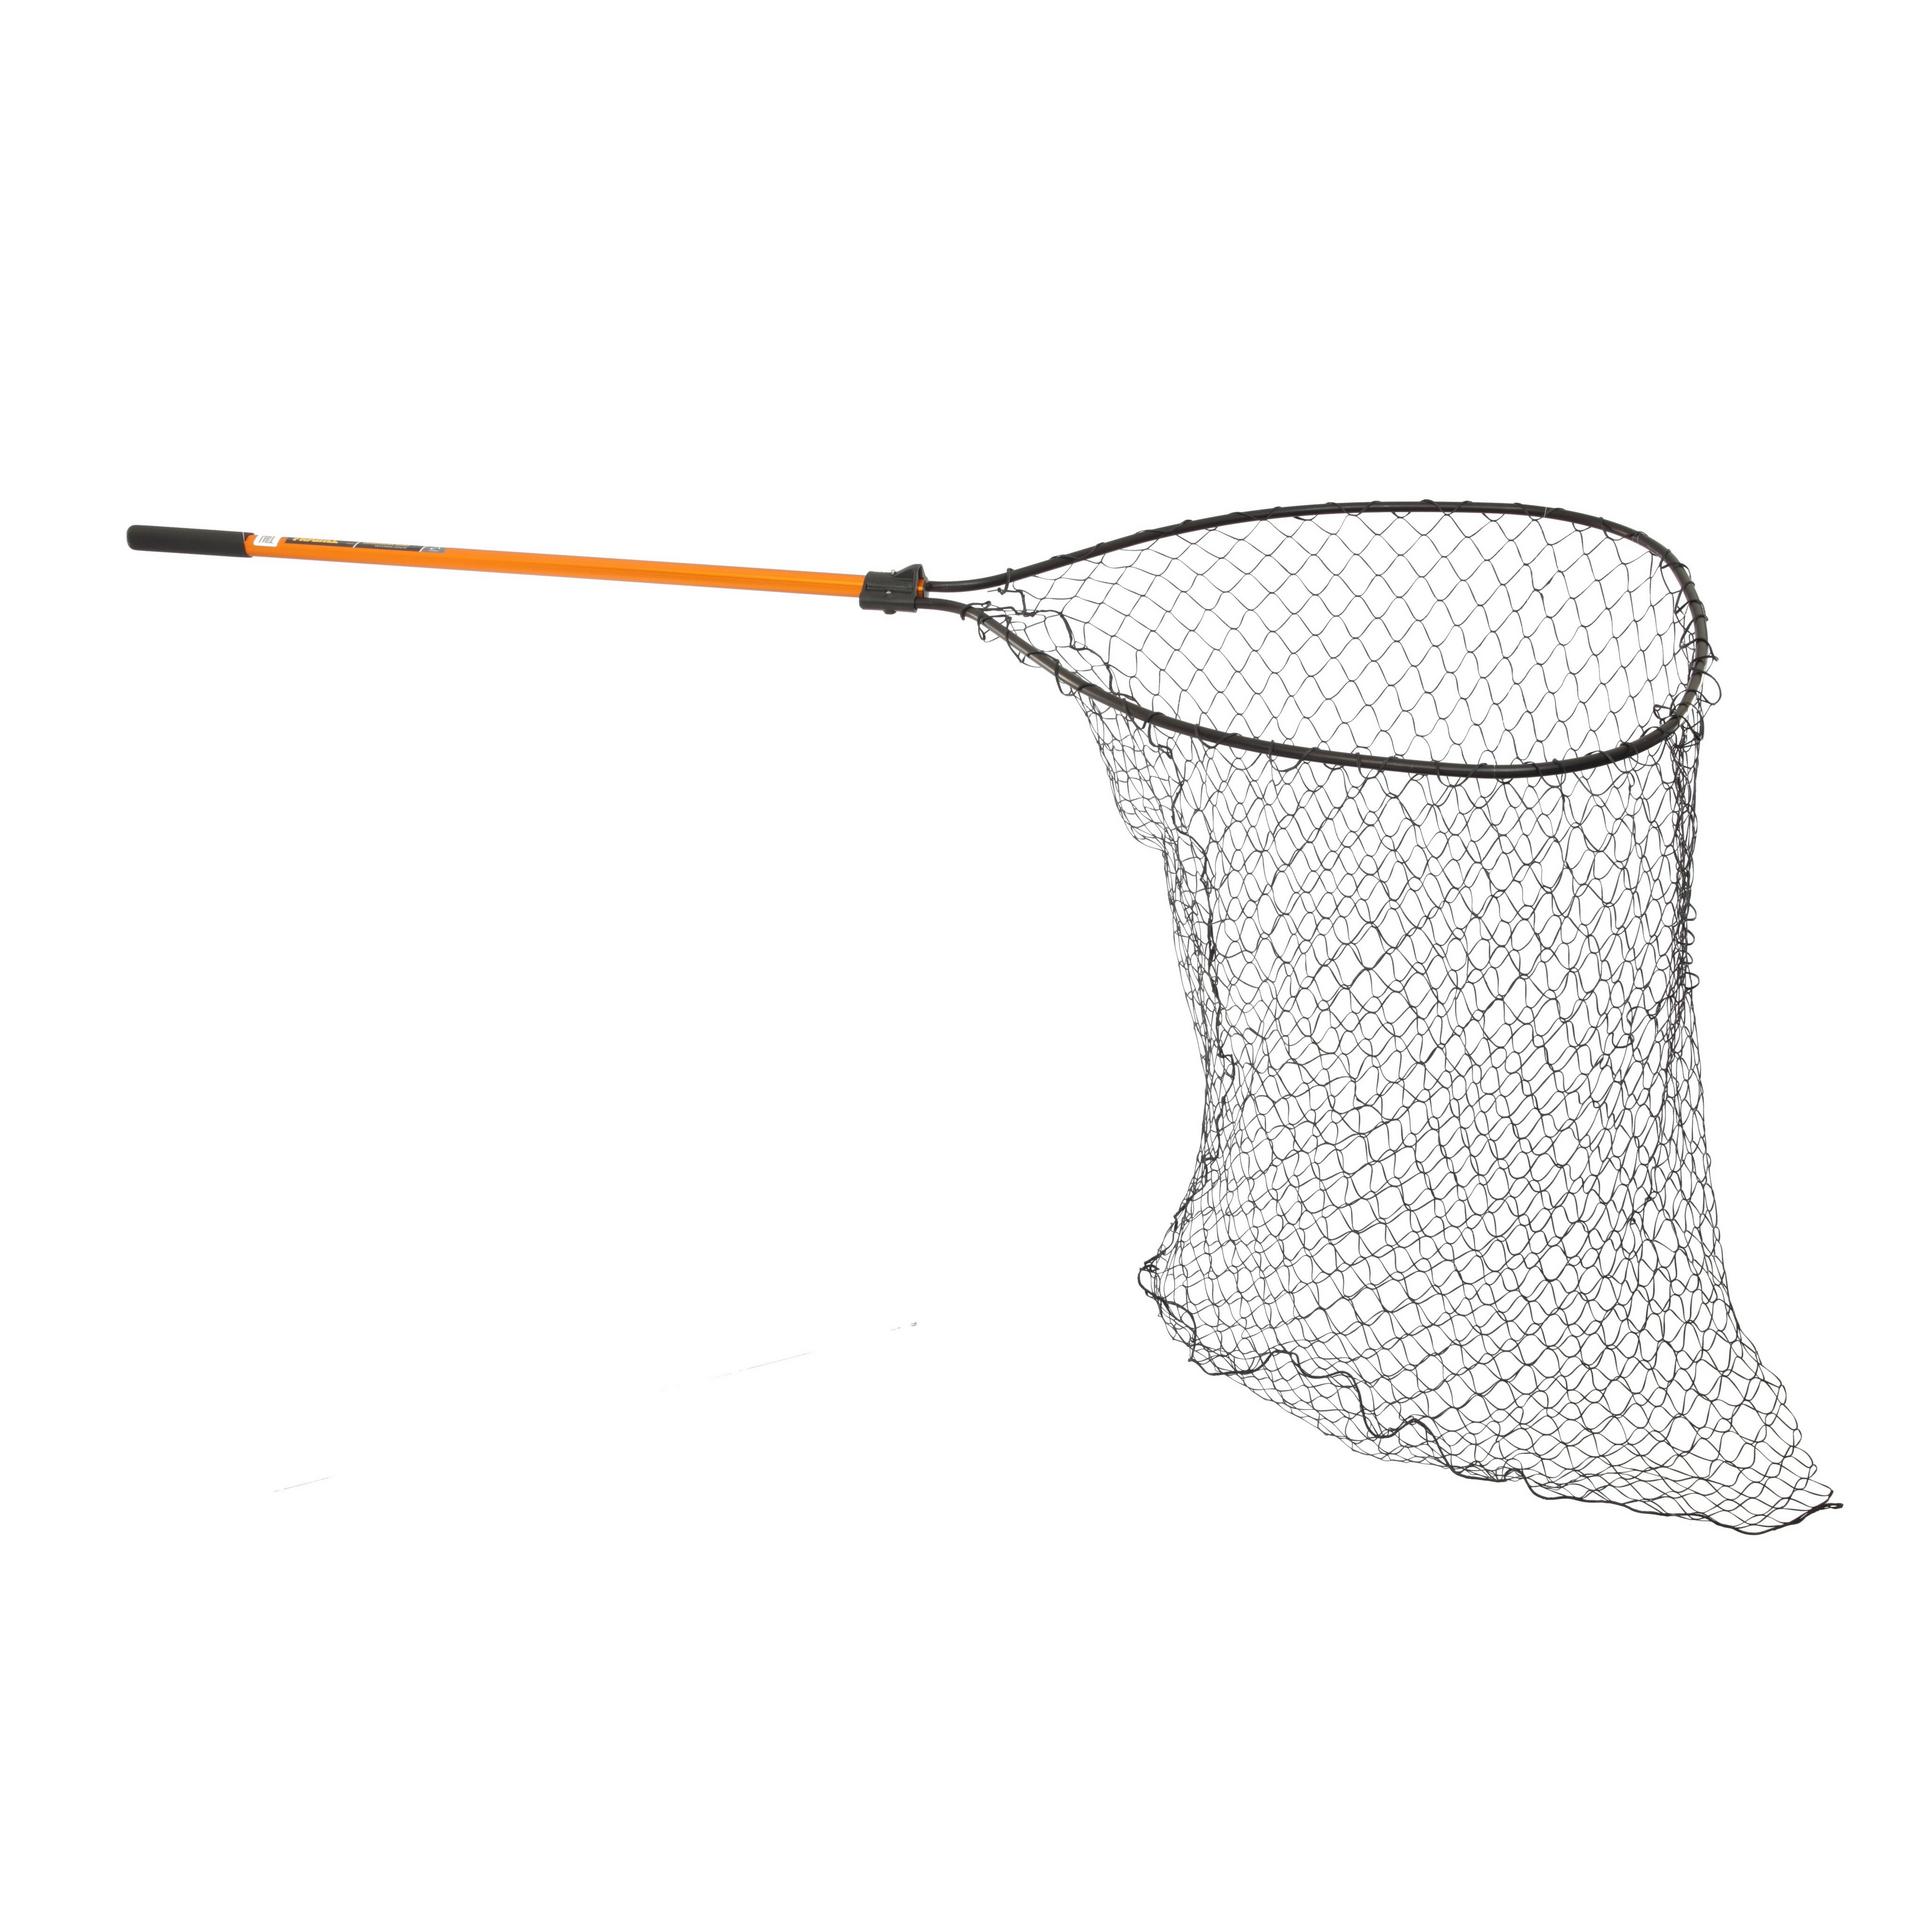 Frabill Power Catch Net 26 x 30 w/Telescoping Extension Handle up to 90